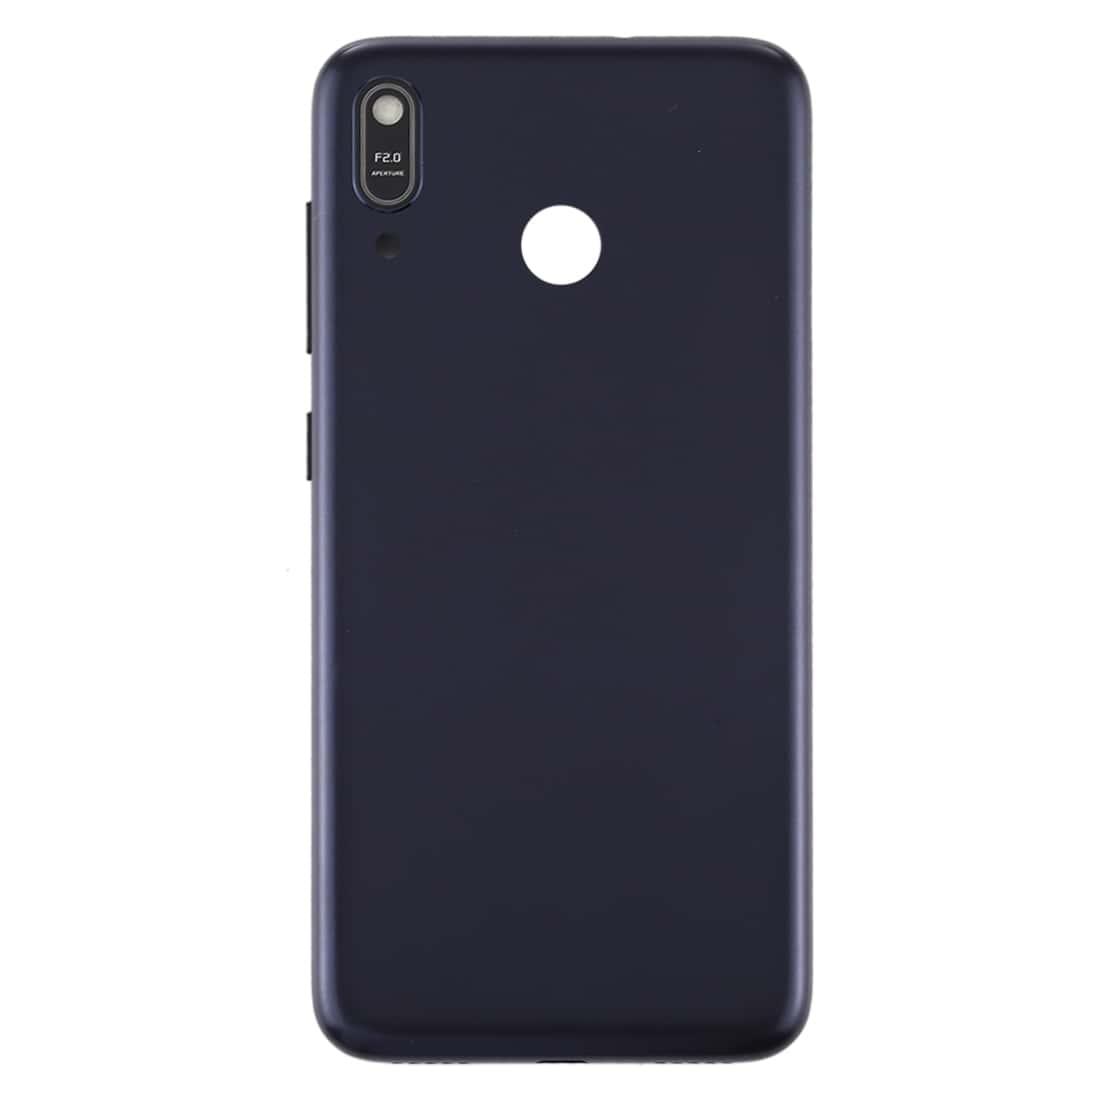 Back Panel Housing Body for Asus Zenfone Max M1 Black Blue with Camera Lens